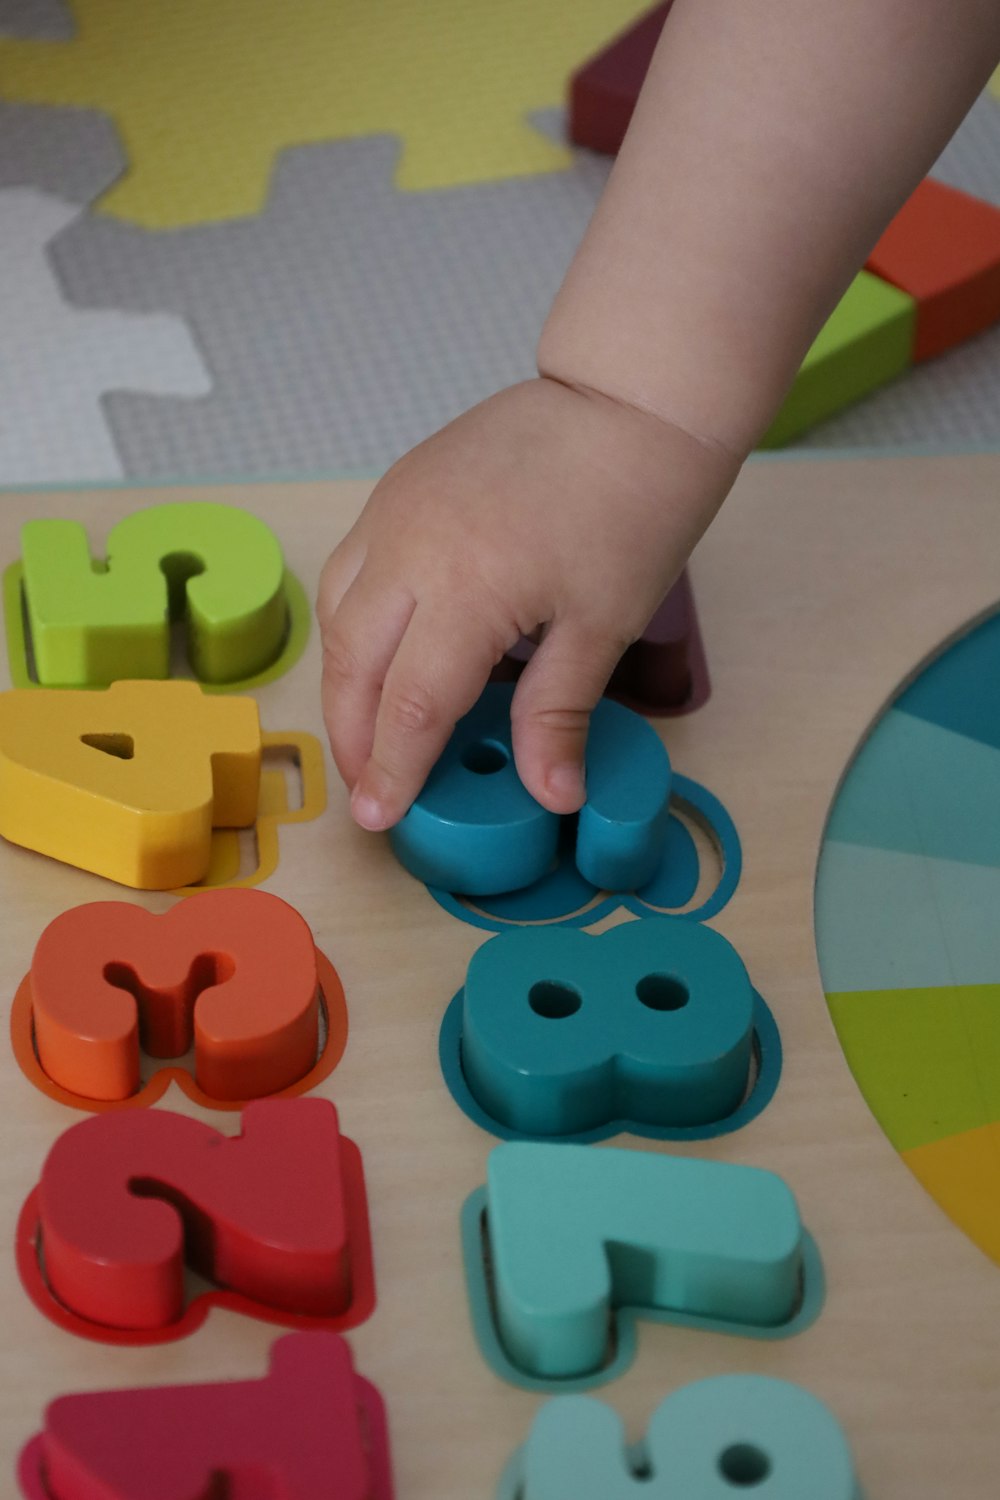 a child playing with wooden letters and numbers